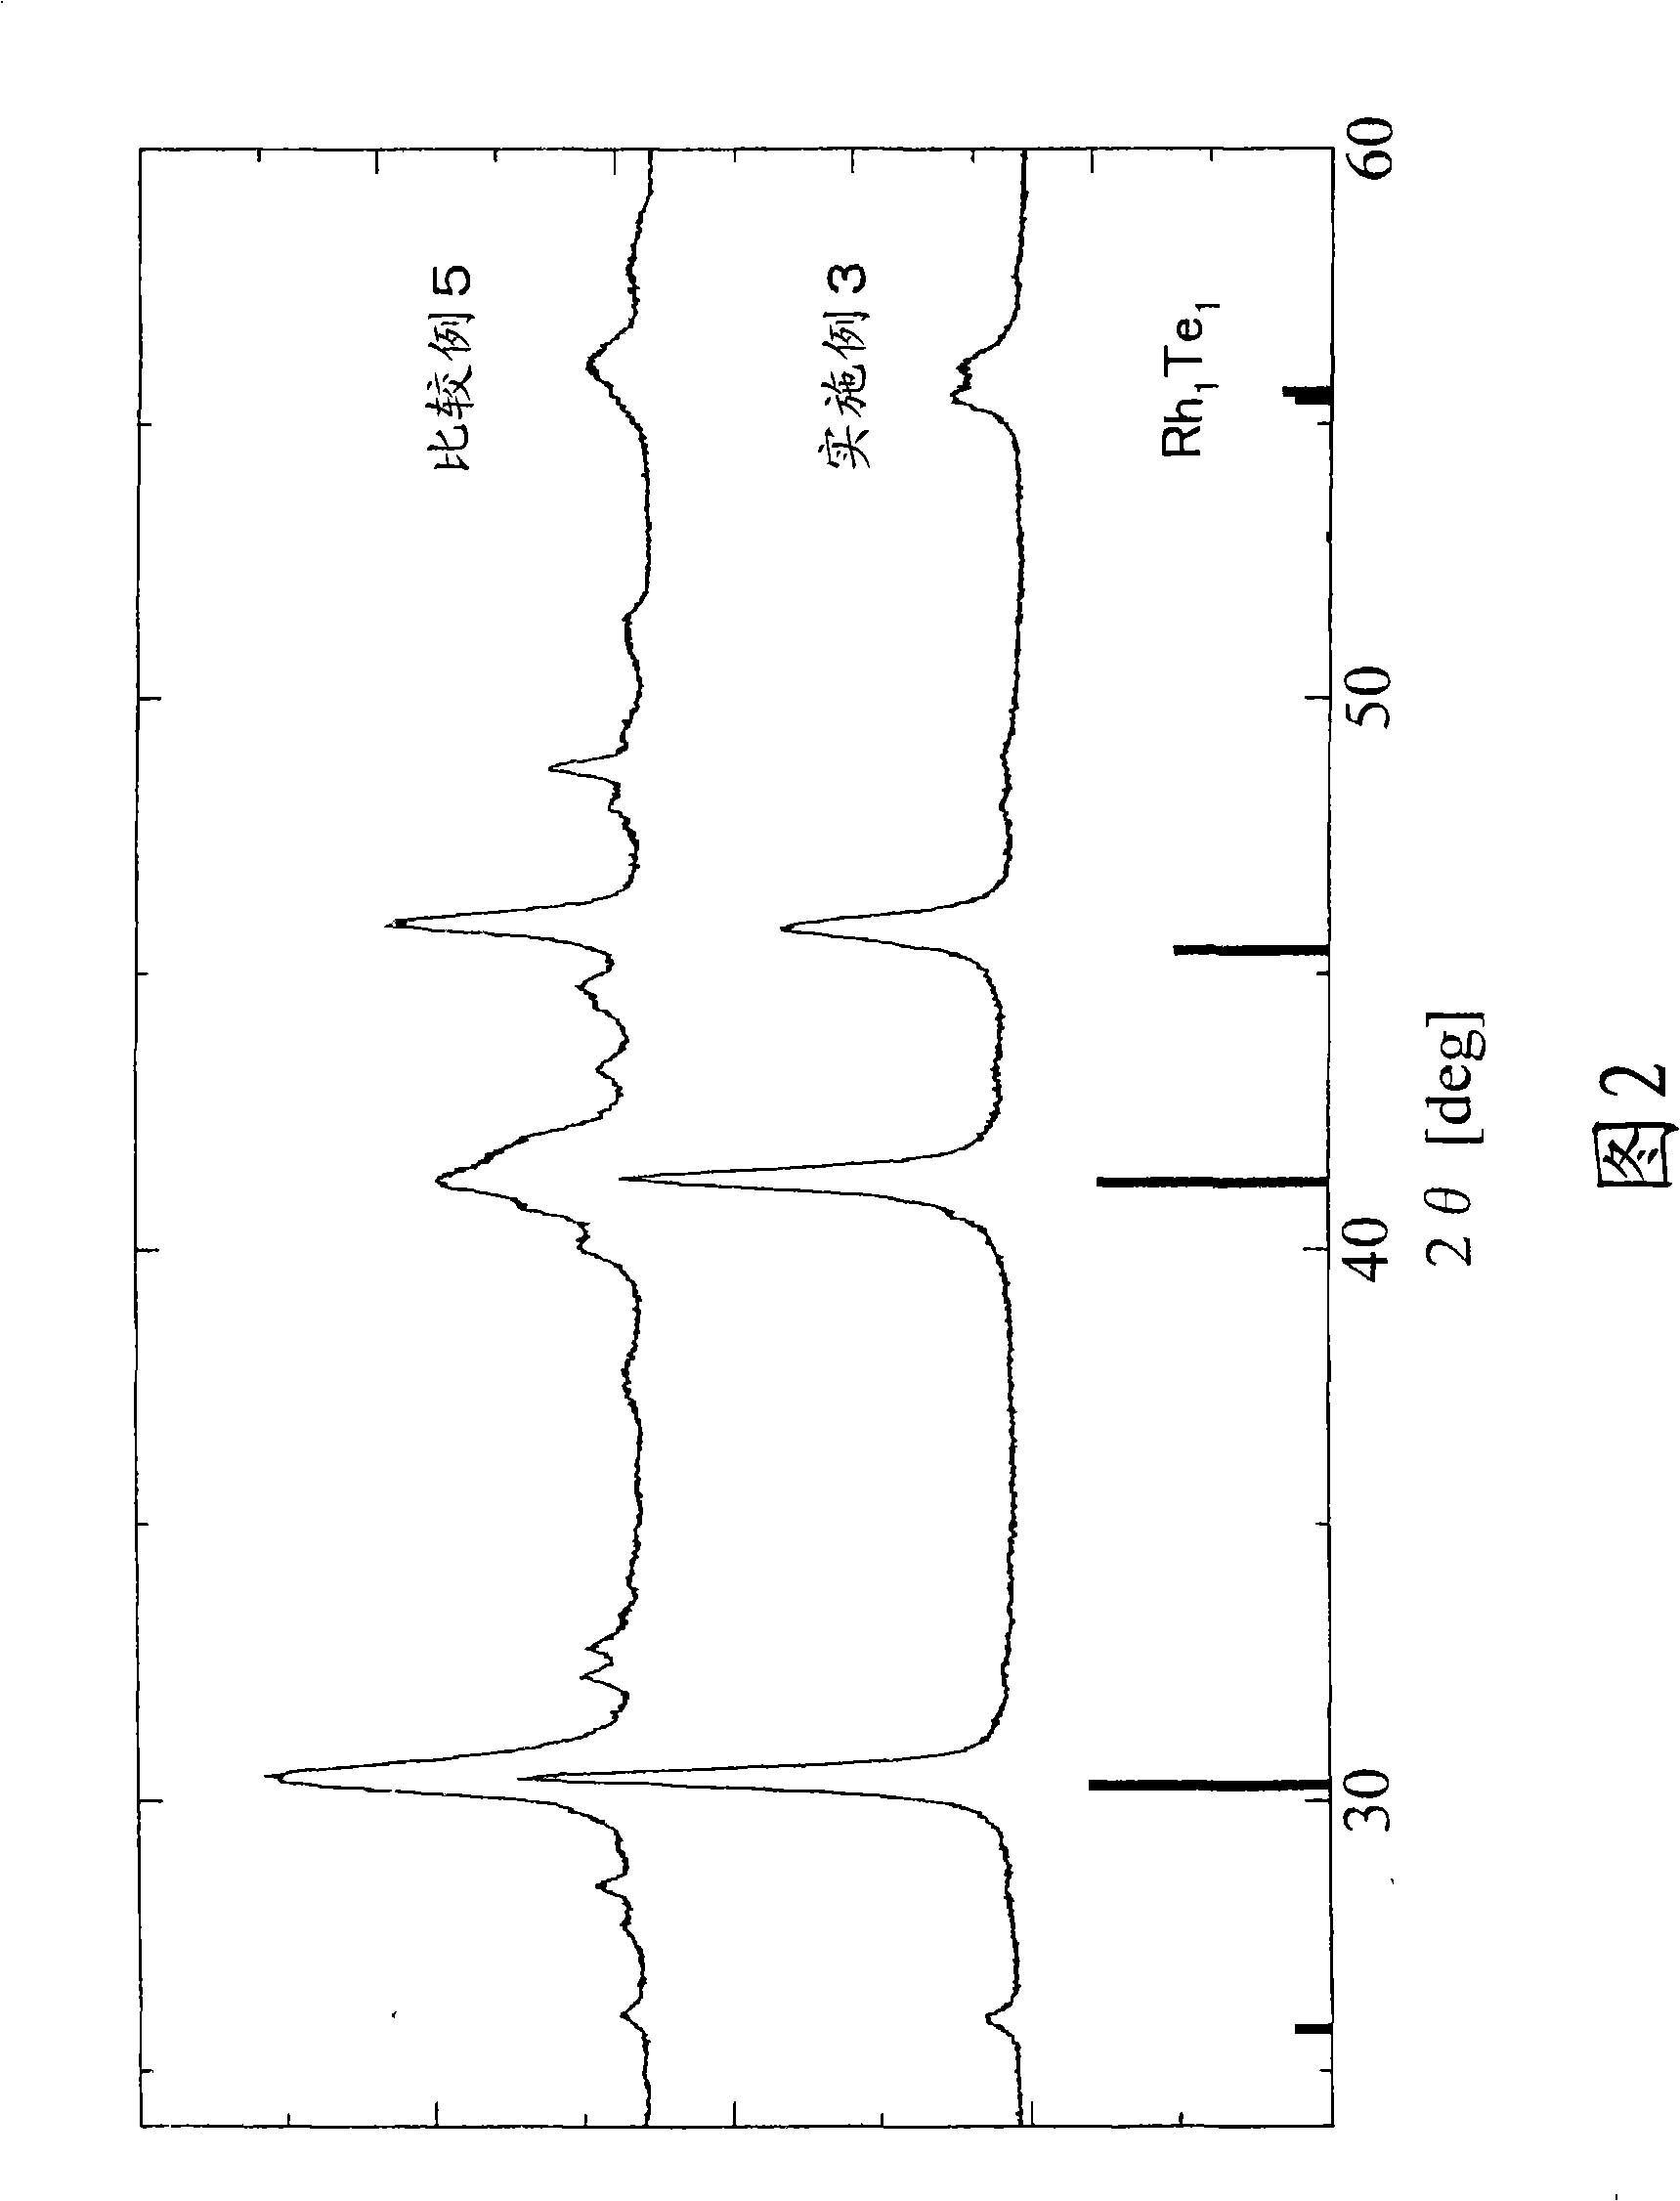 Rhodium-tellurium intermetallic compound particle, method for producing the same, and use of the same